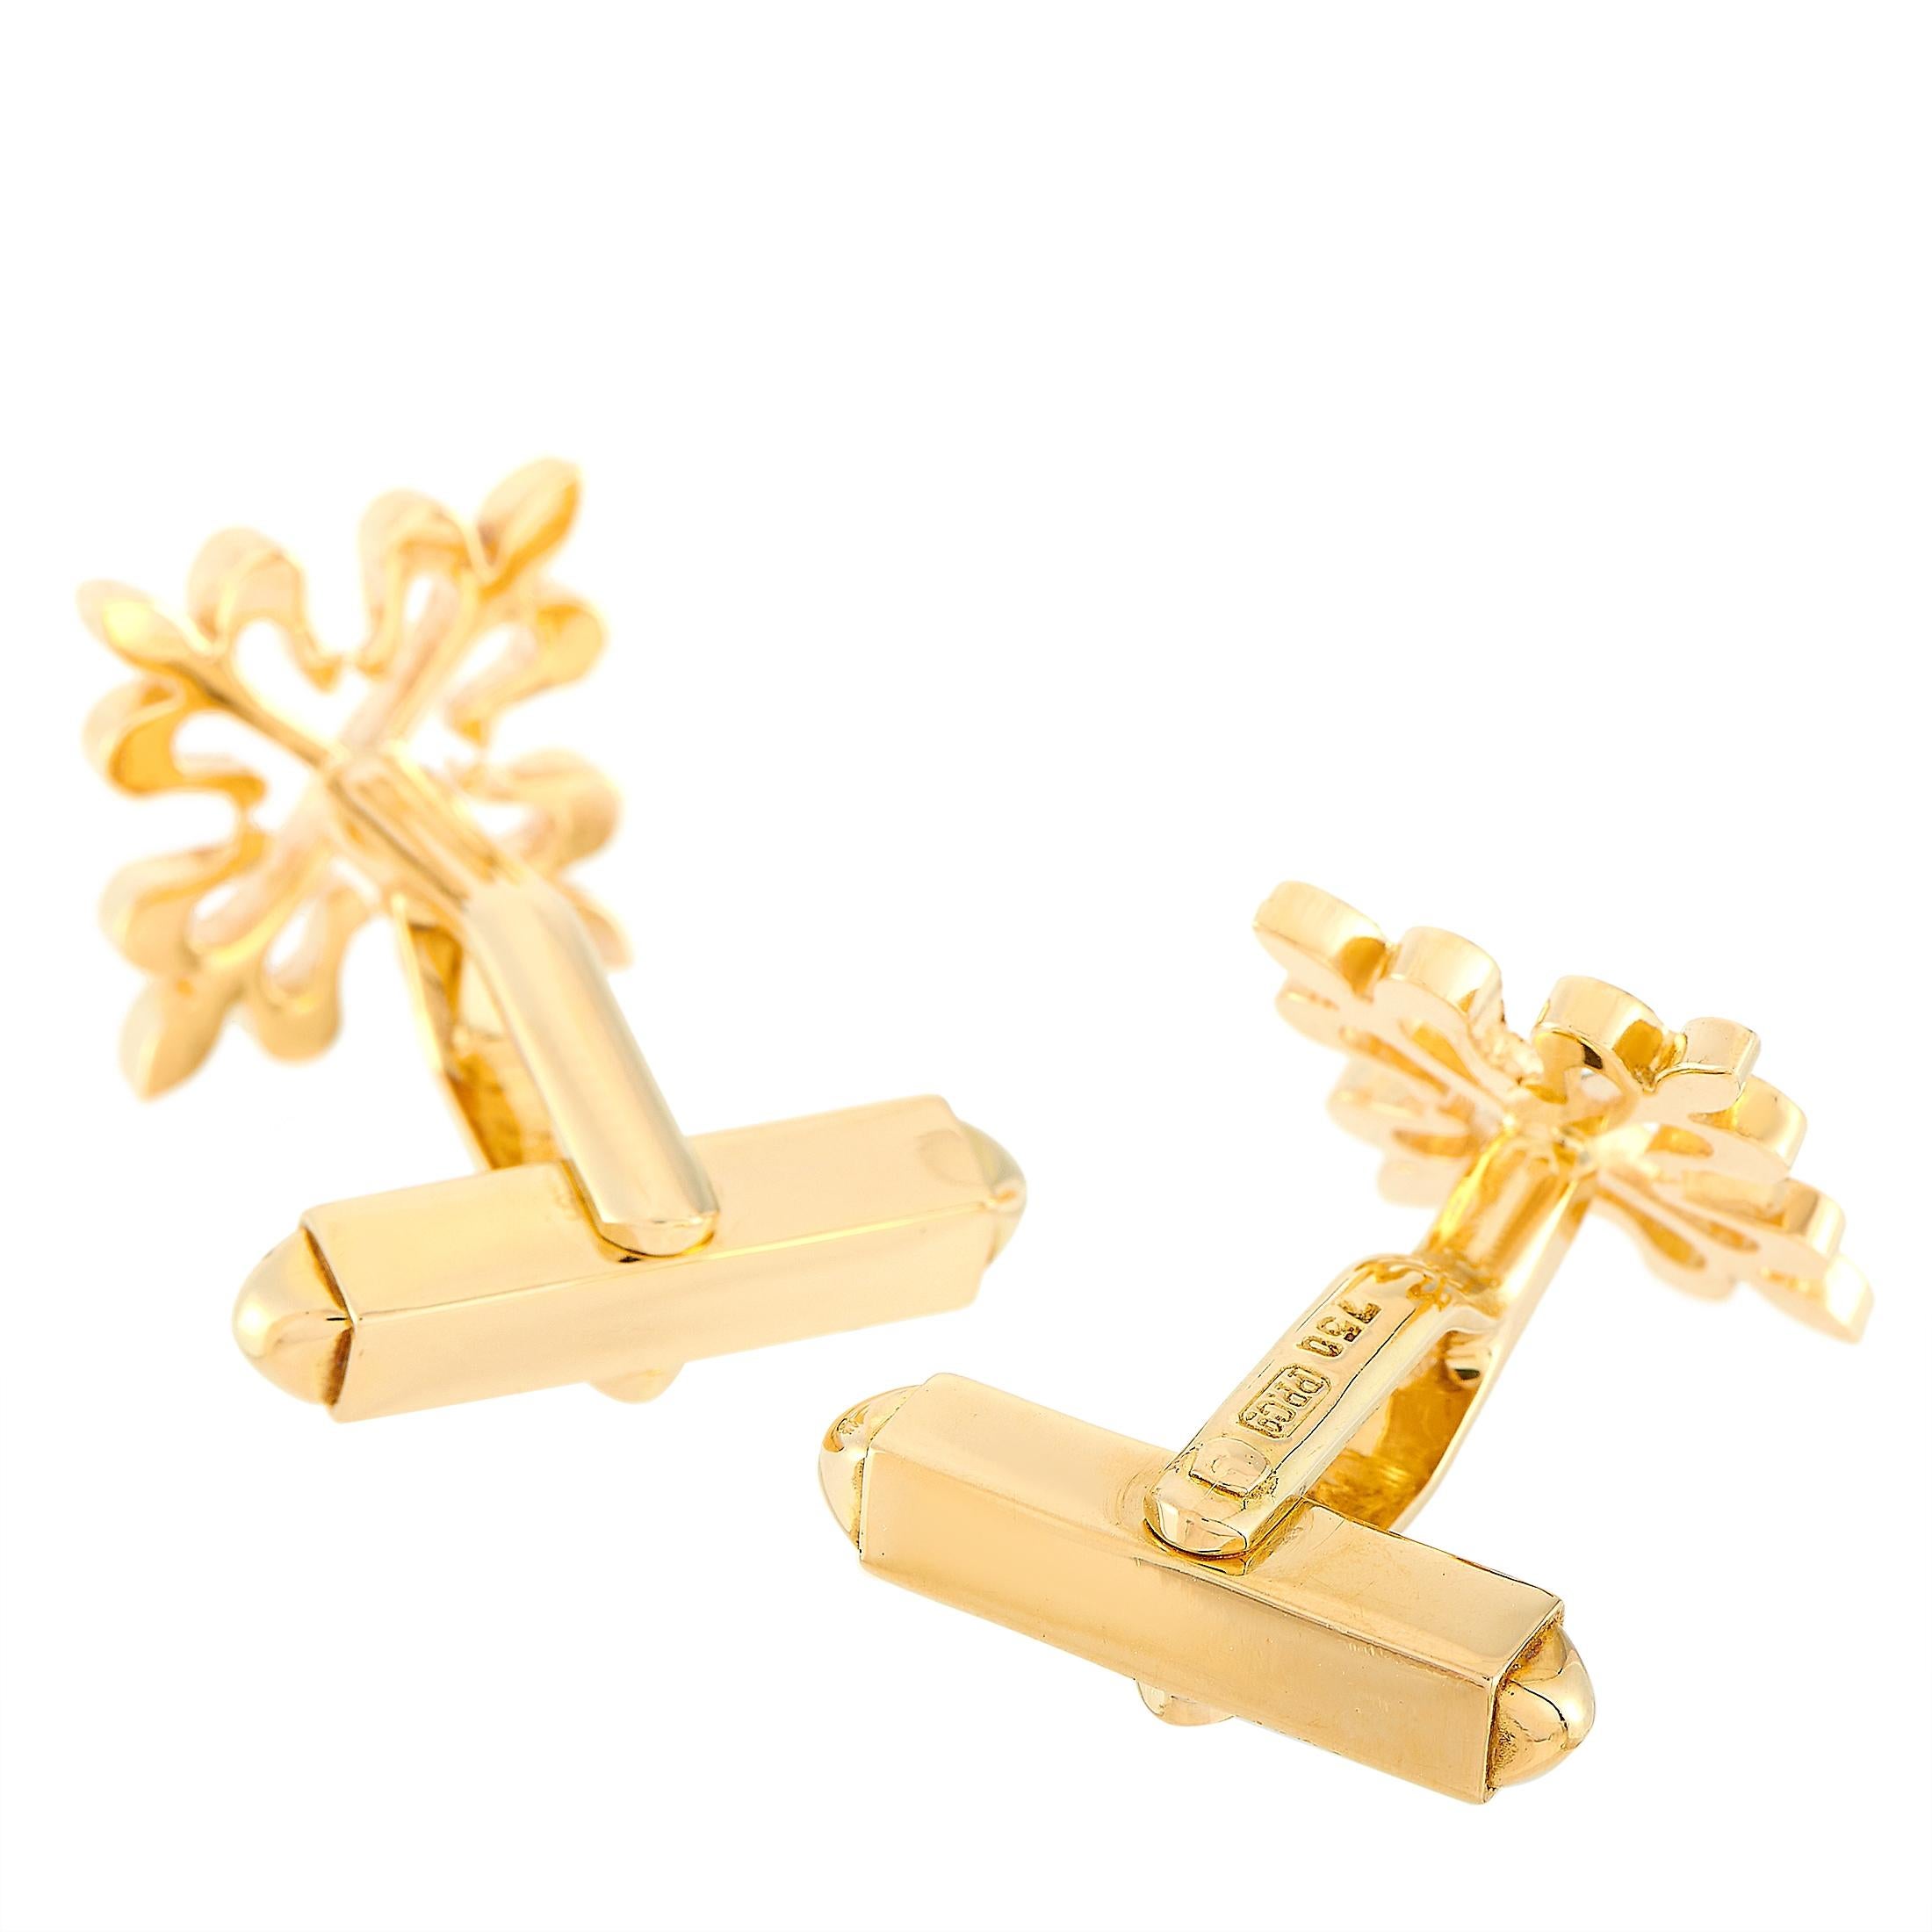 The Patek Philippe “Calatrava” cufflinks are crafted from 18K yellow gold and each of the two weighs 5.6 grams. The cufflinks measure 0.55” in length and 0.55” in width.

The pair is offered in estate condition and includes the manufacturer’s box.